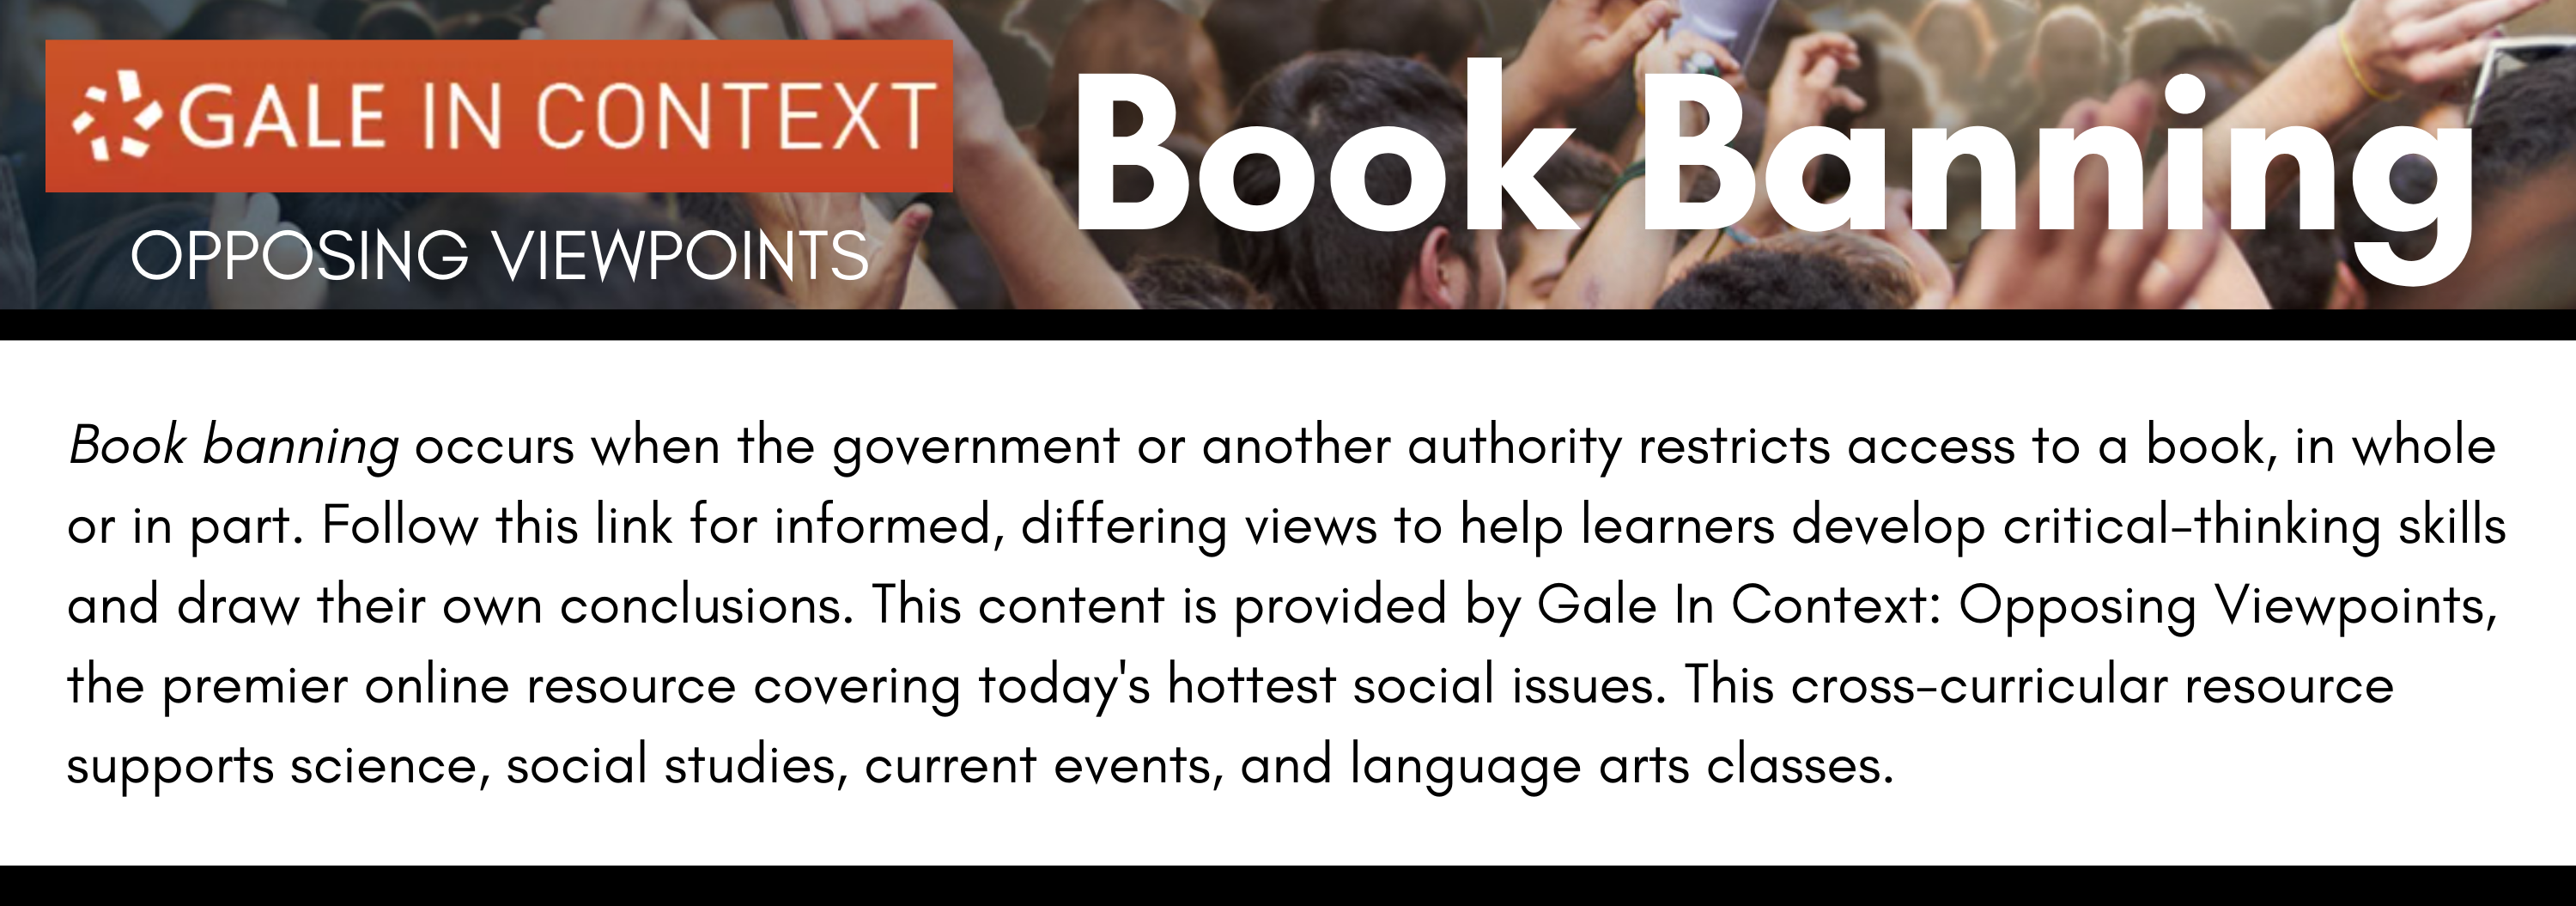 Gale In Context, Opposing Viewpoints on Book Banning